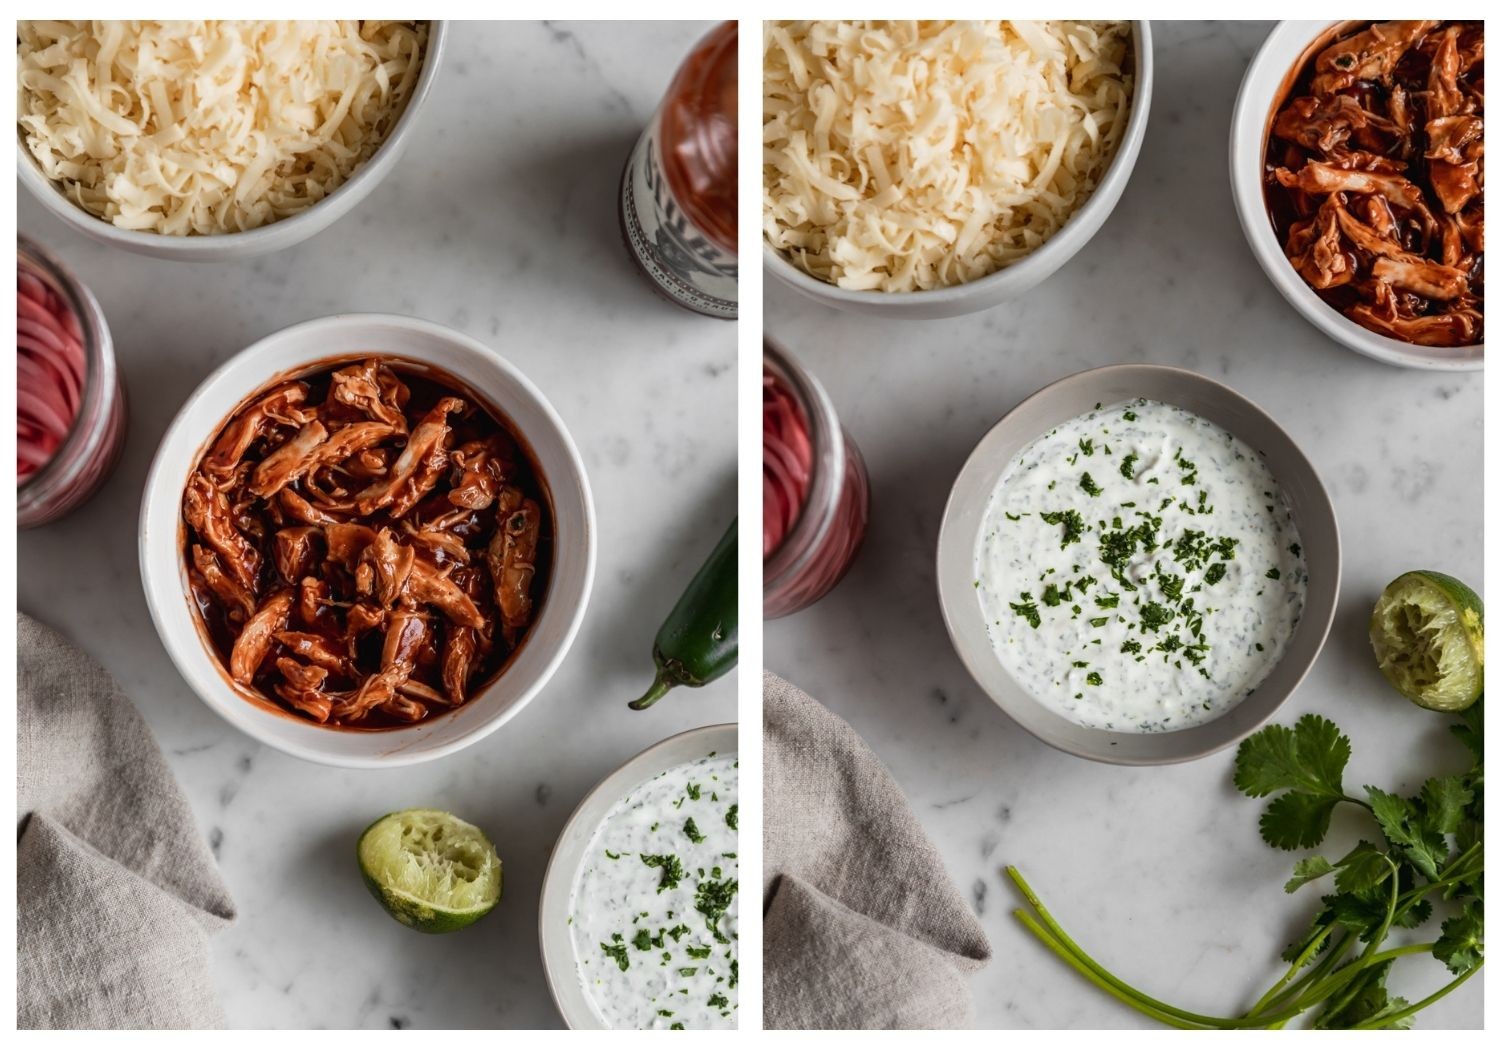 Two overhead images; on the left, a bowl of shredded BBQ chicken on a marble counter surrounded by nacho ingredients, and on the right, a bowl of crema surrounded by ingredients.